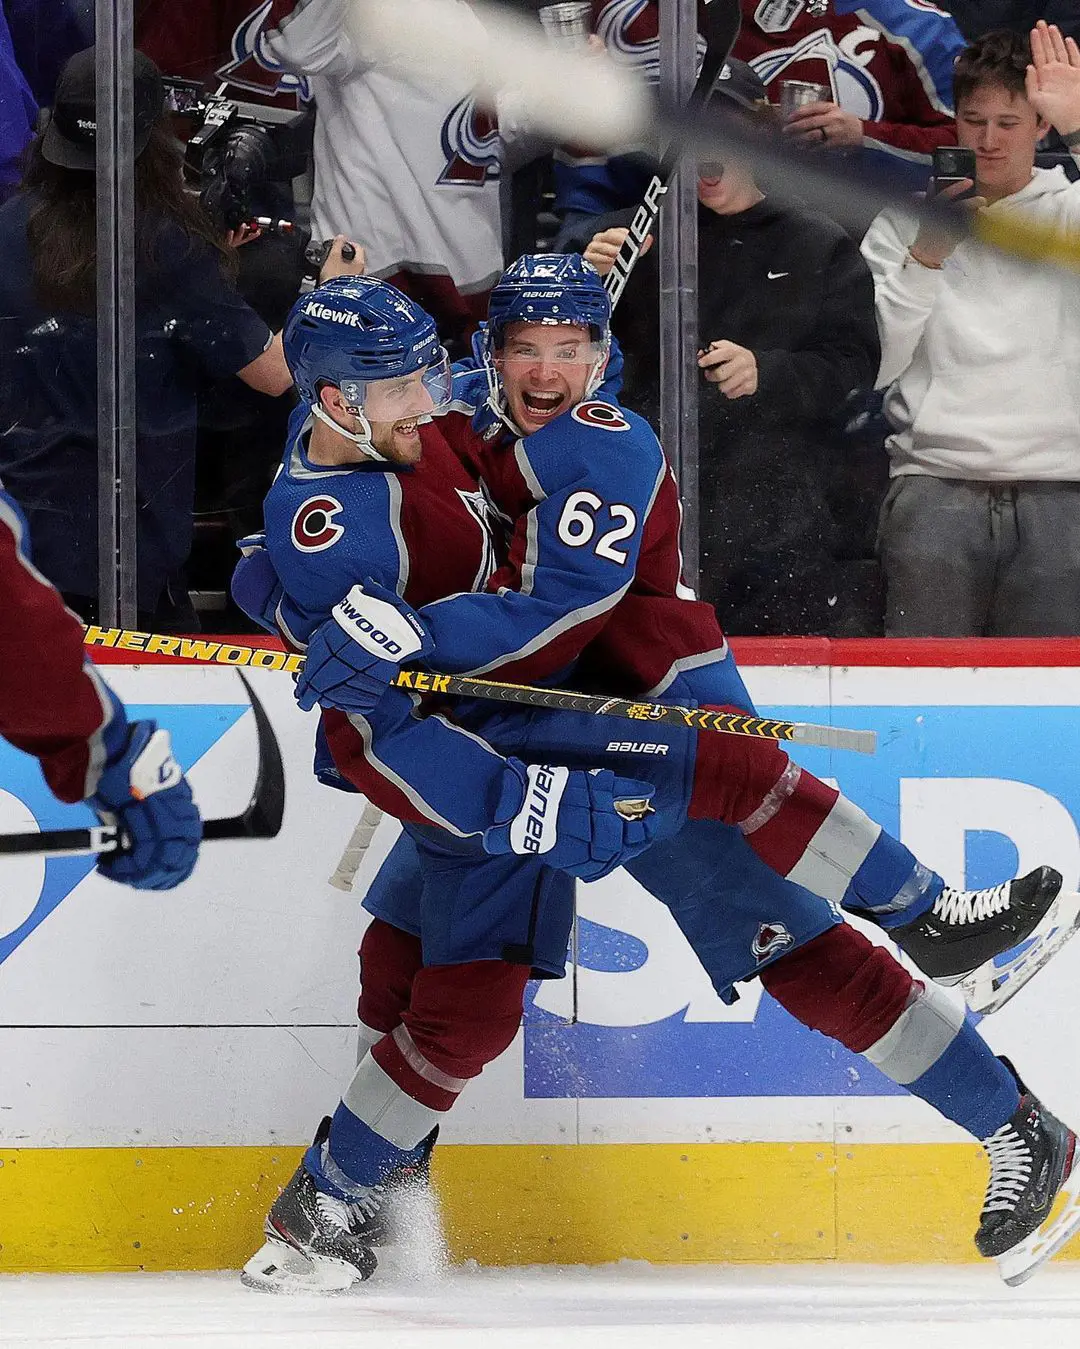 The Colorado Avalanche was known as the Quebec Nordiques